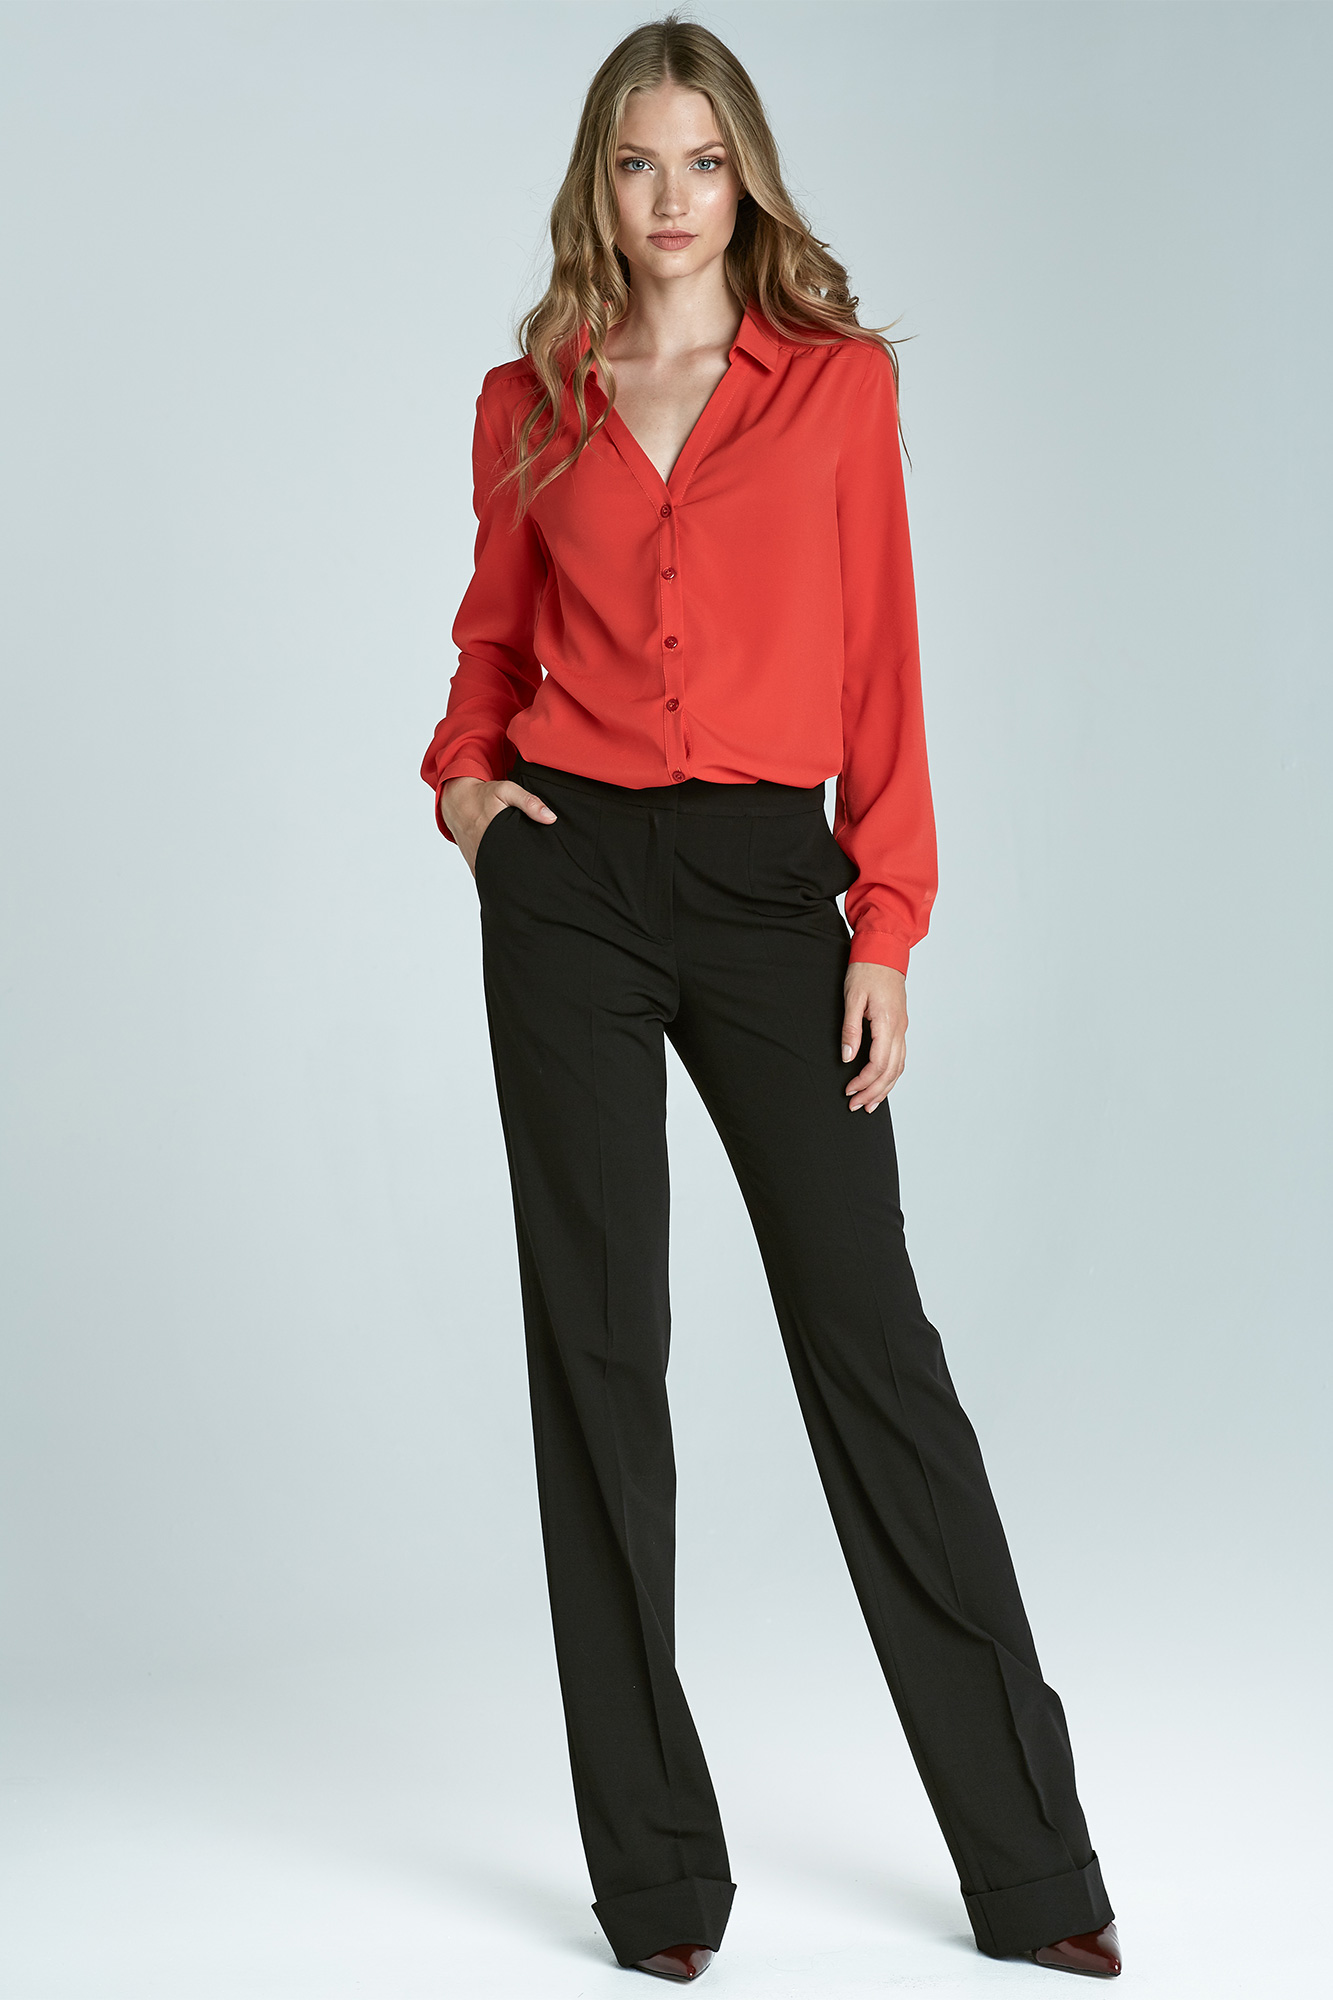 Women's loose pants with red blouse, V-neckline